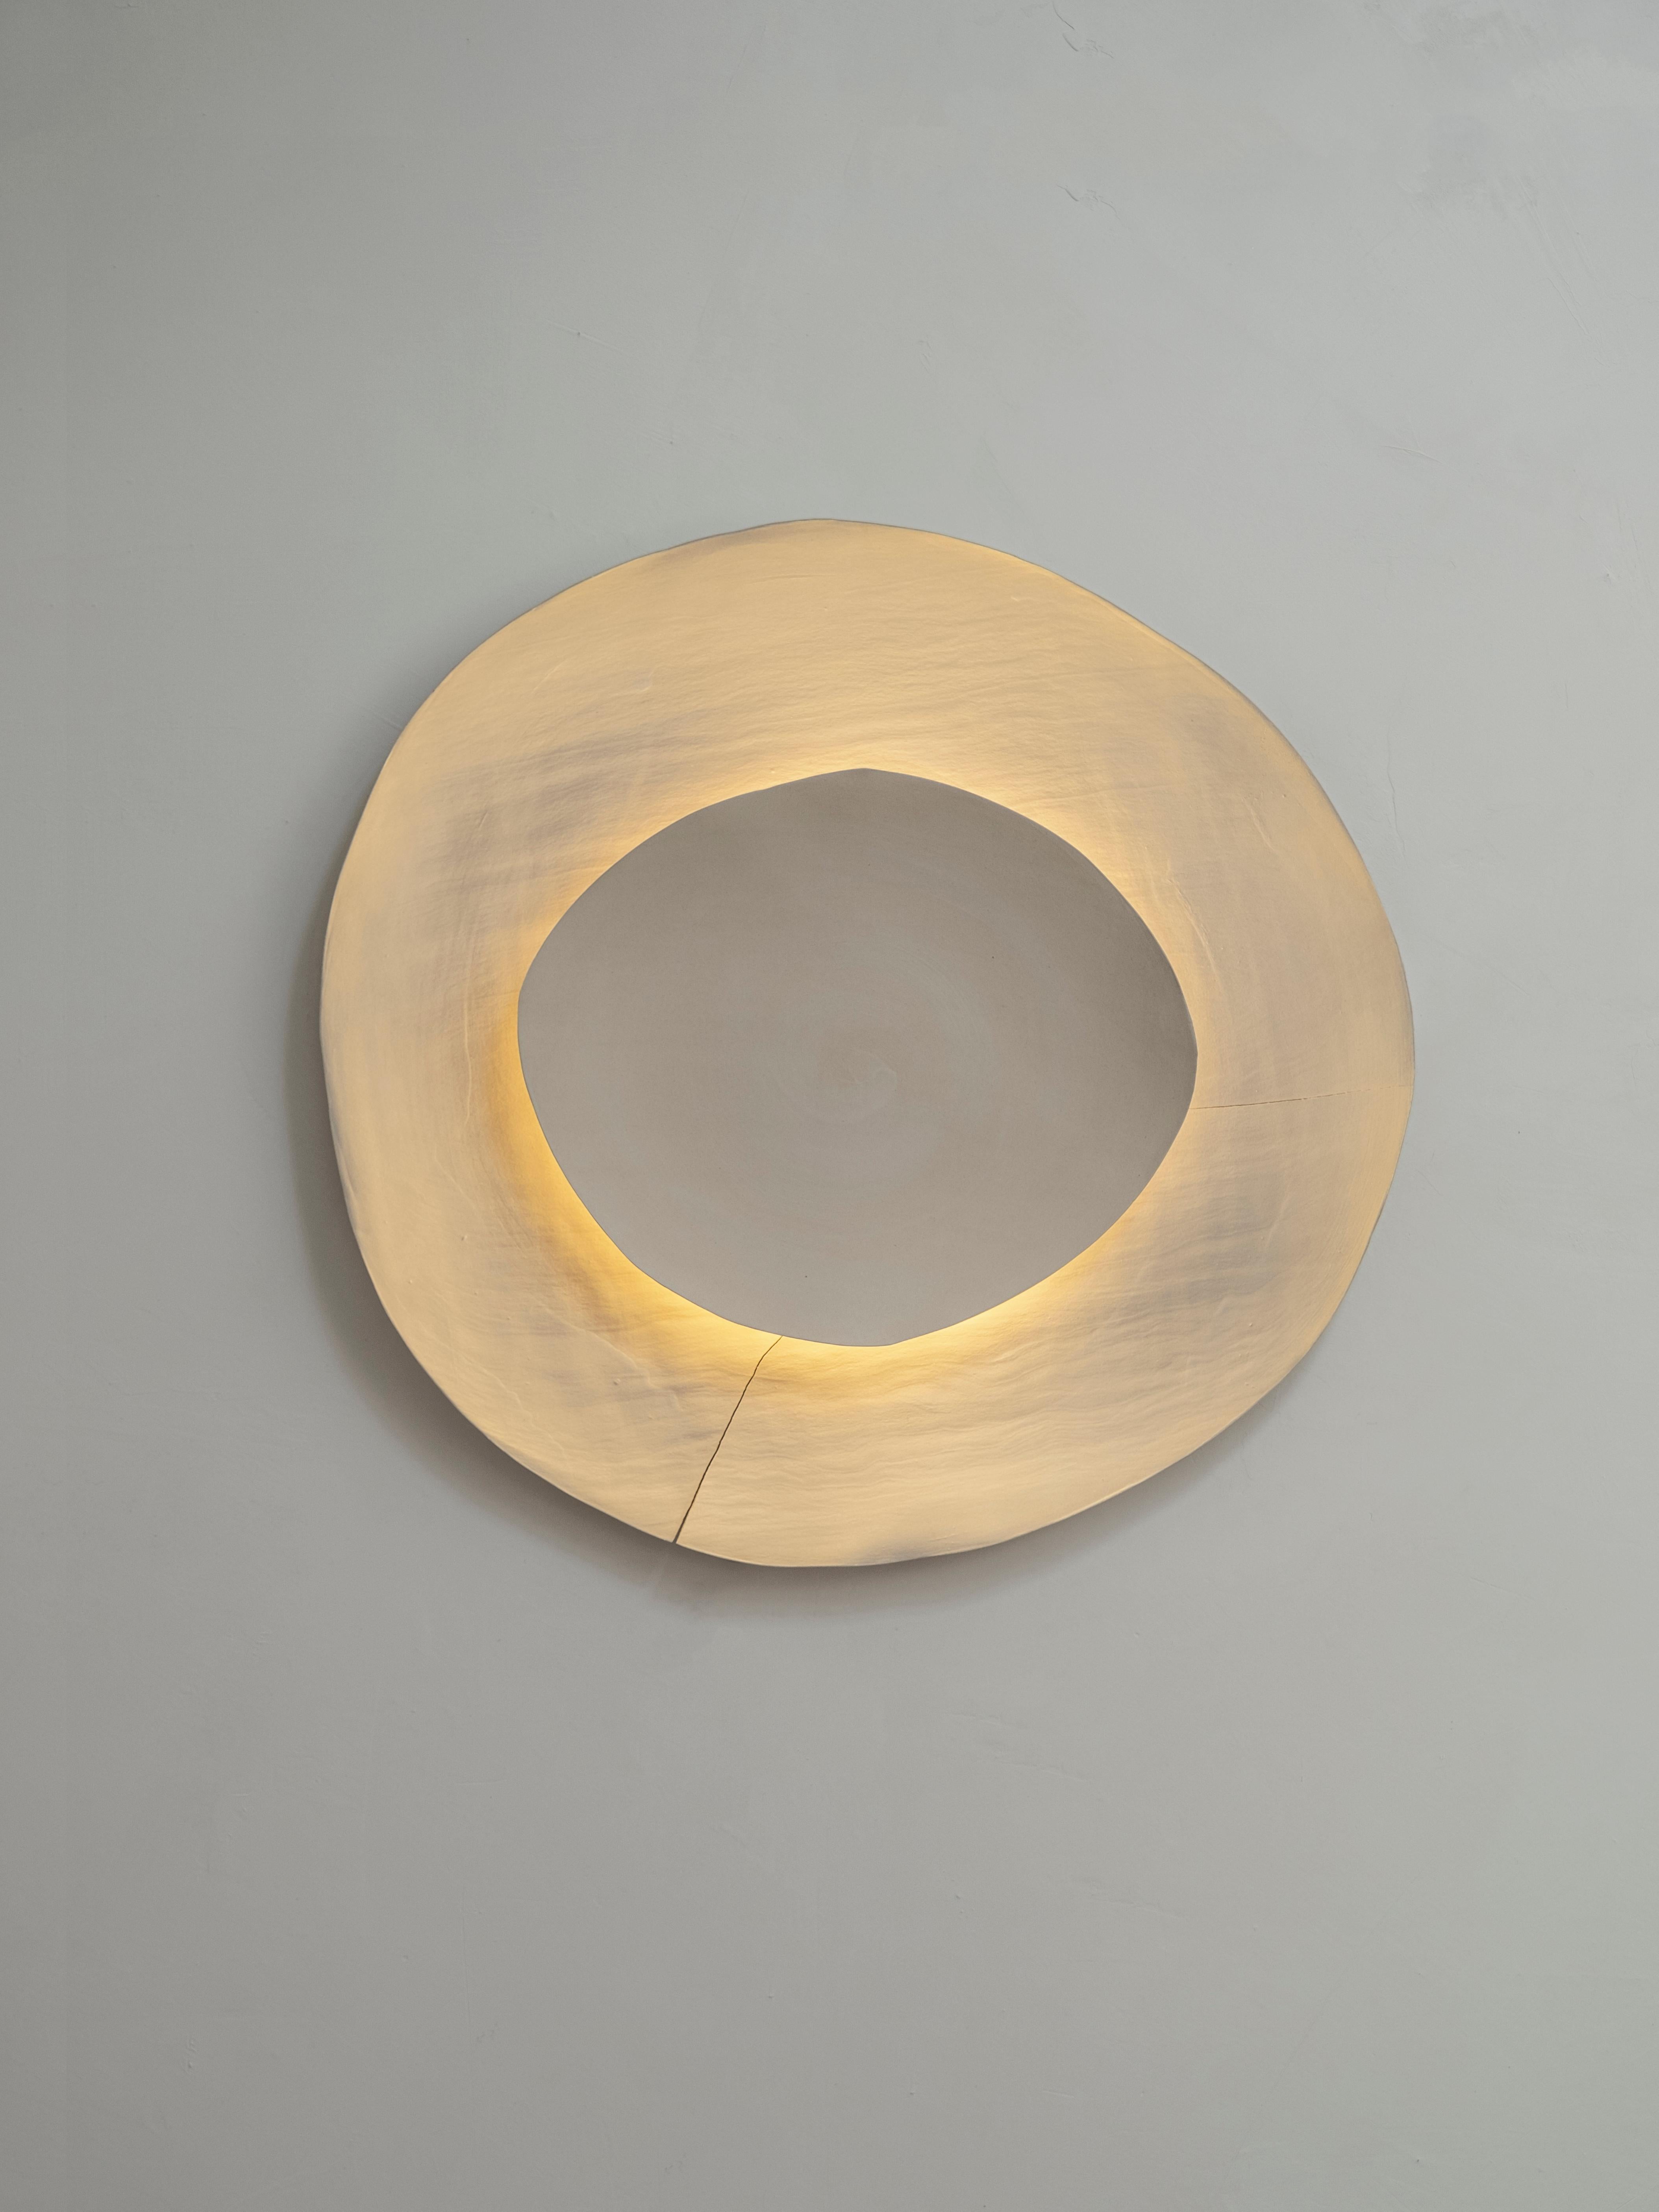 Silk #11 wall light by Margaux Leycuras.
One of a Kind, Signed and numbered.
Dimensions: Ø56 cm.
Material: Ceramic, sandy stoneware platters with a porcelain slip finish.
The piece is signed, numbered and delivered with a certificate of